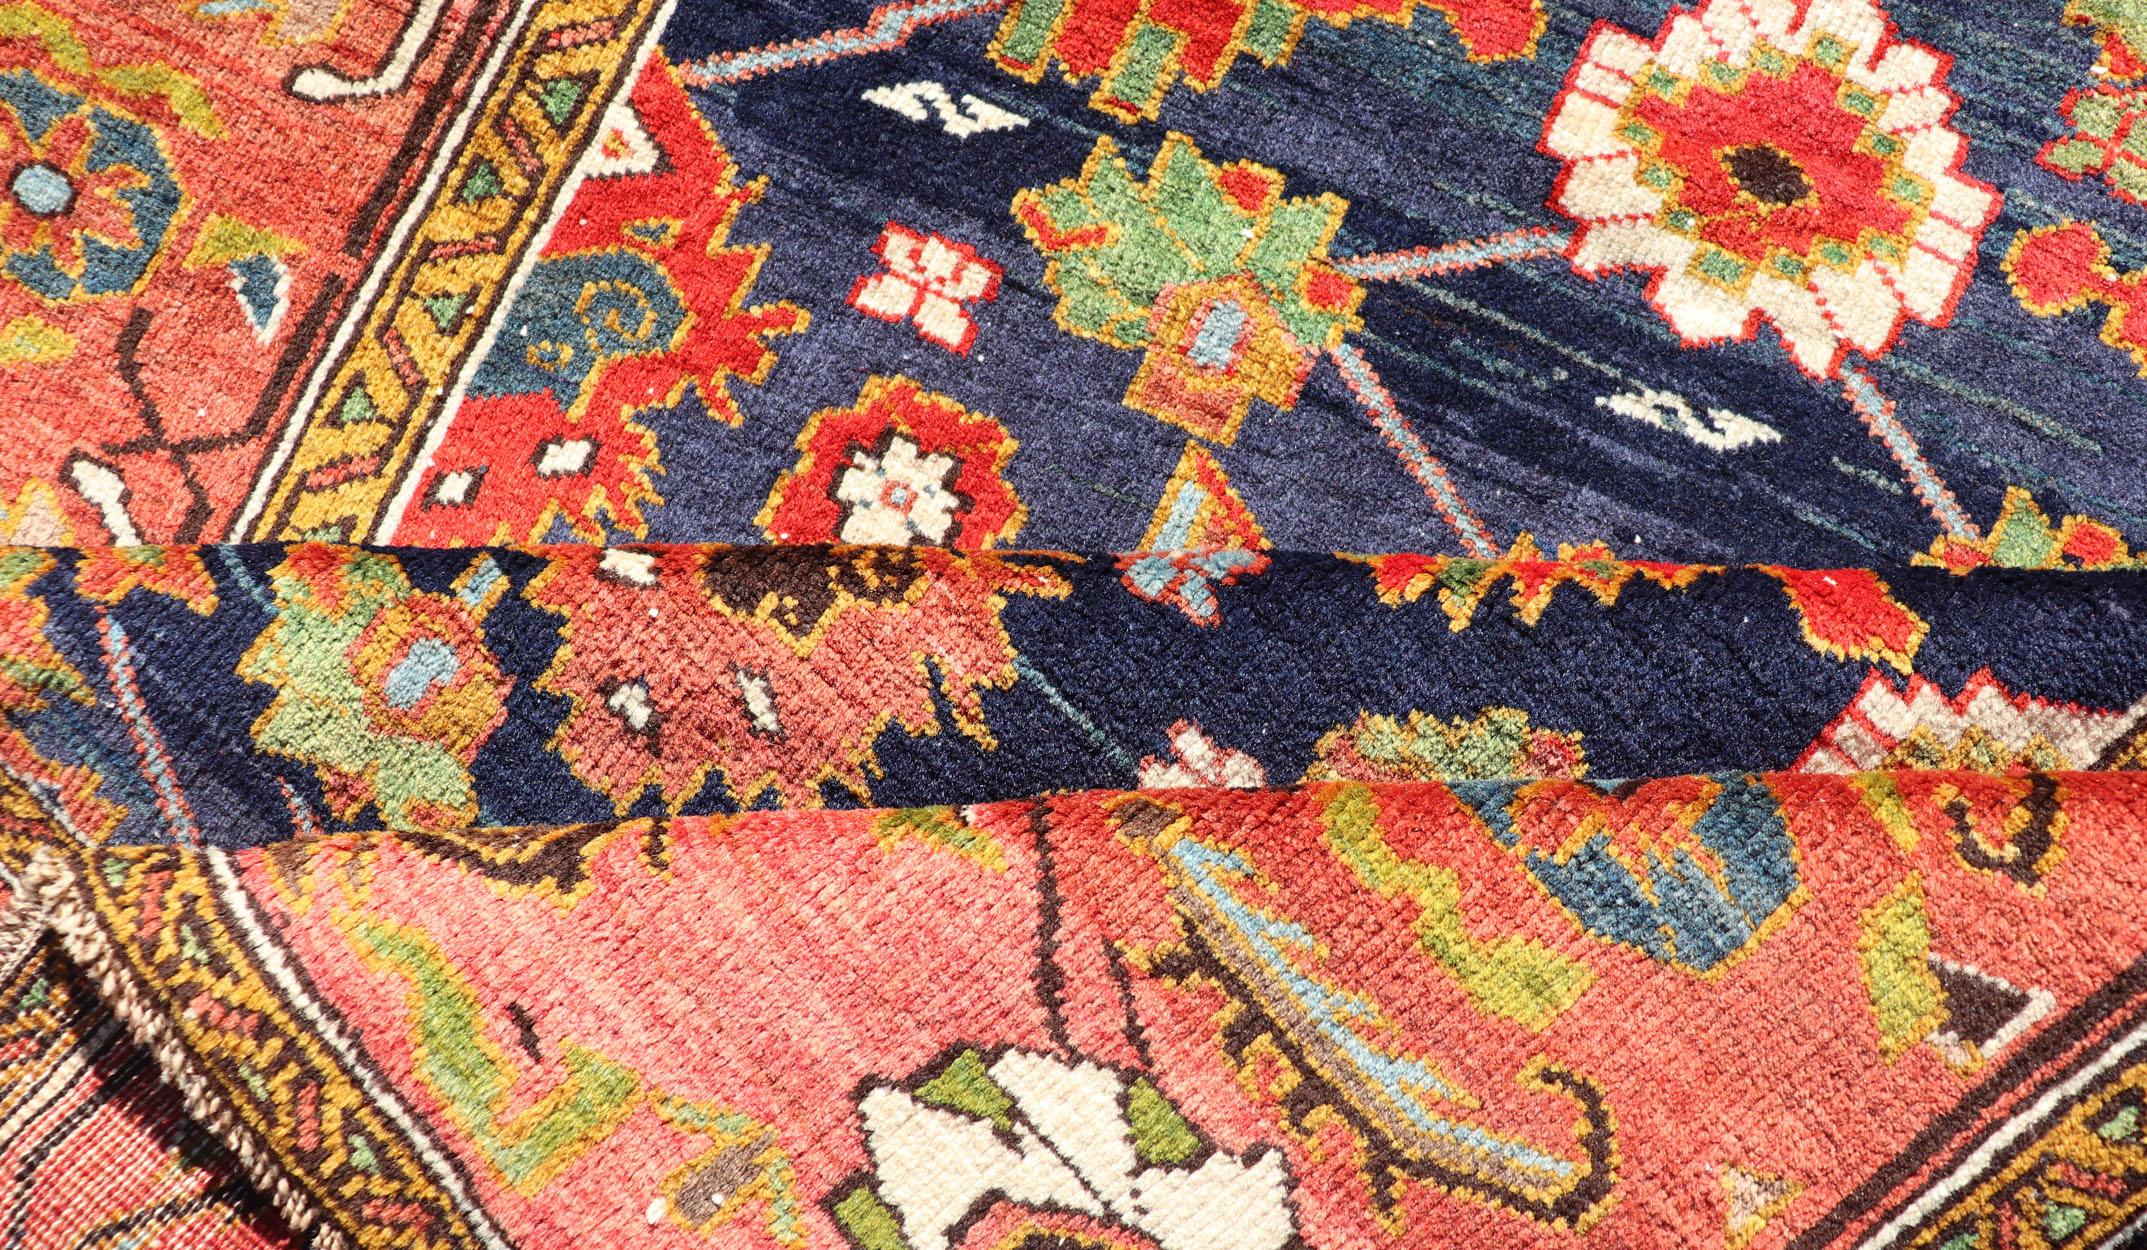 Antique Caucasian Rug with All-Over Design in Royal Blue Field, Soft Red & Green For Sale 4